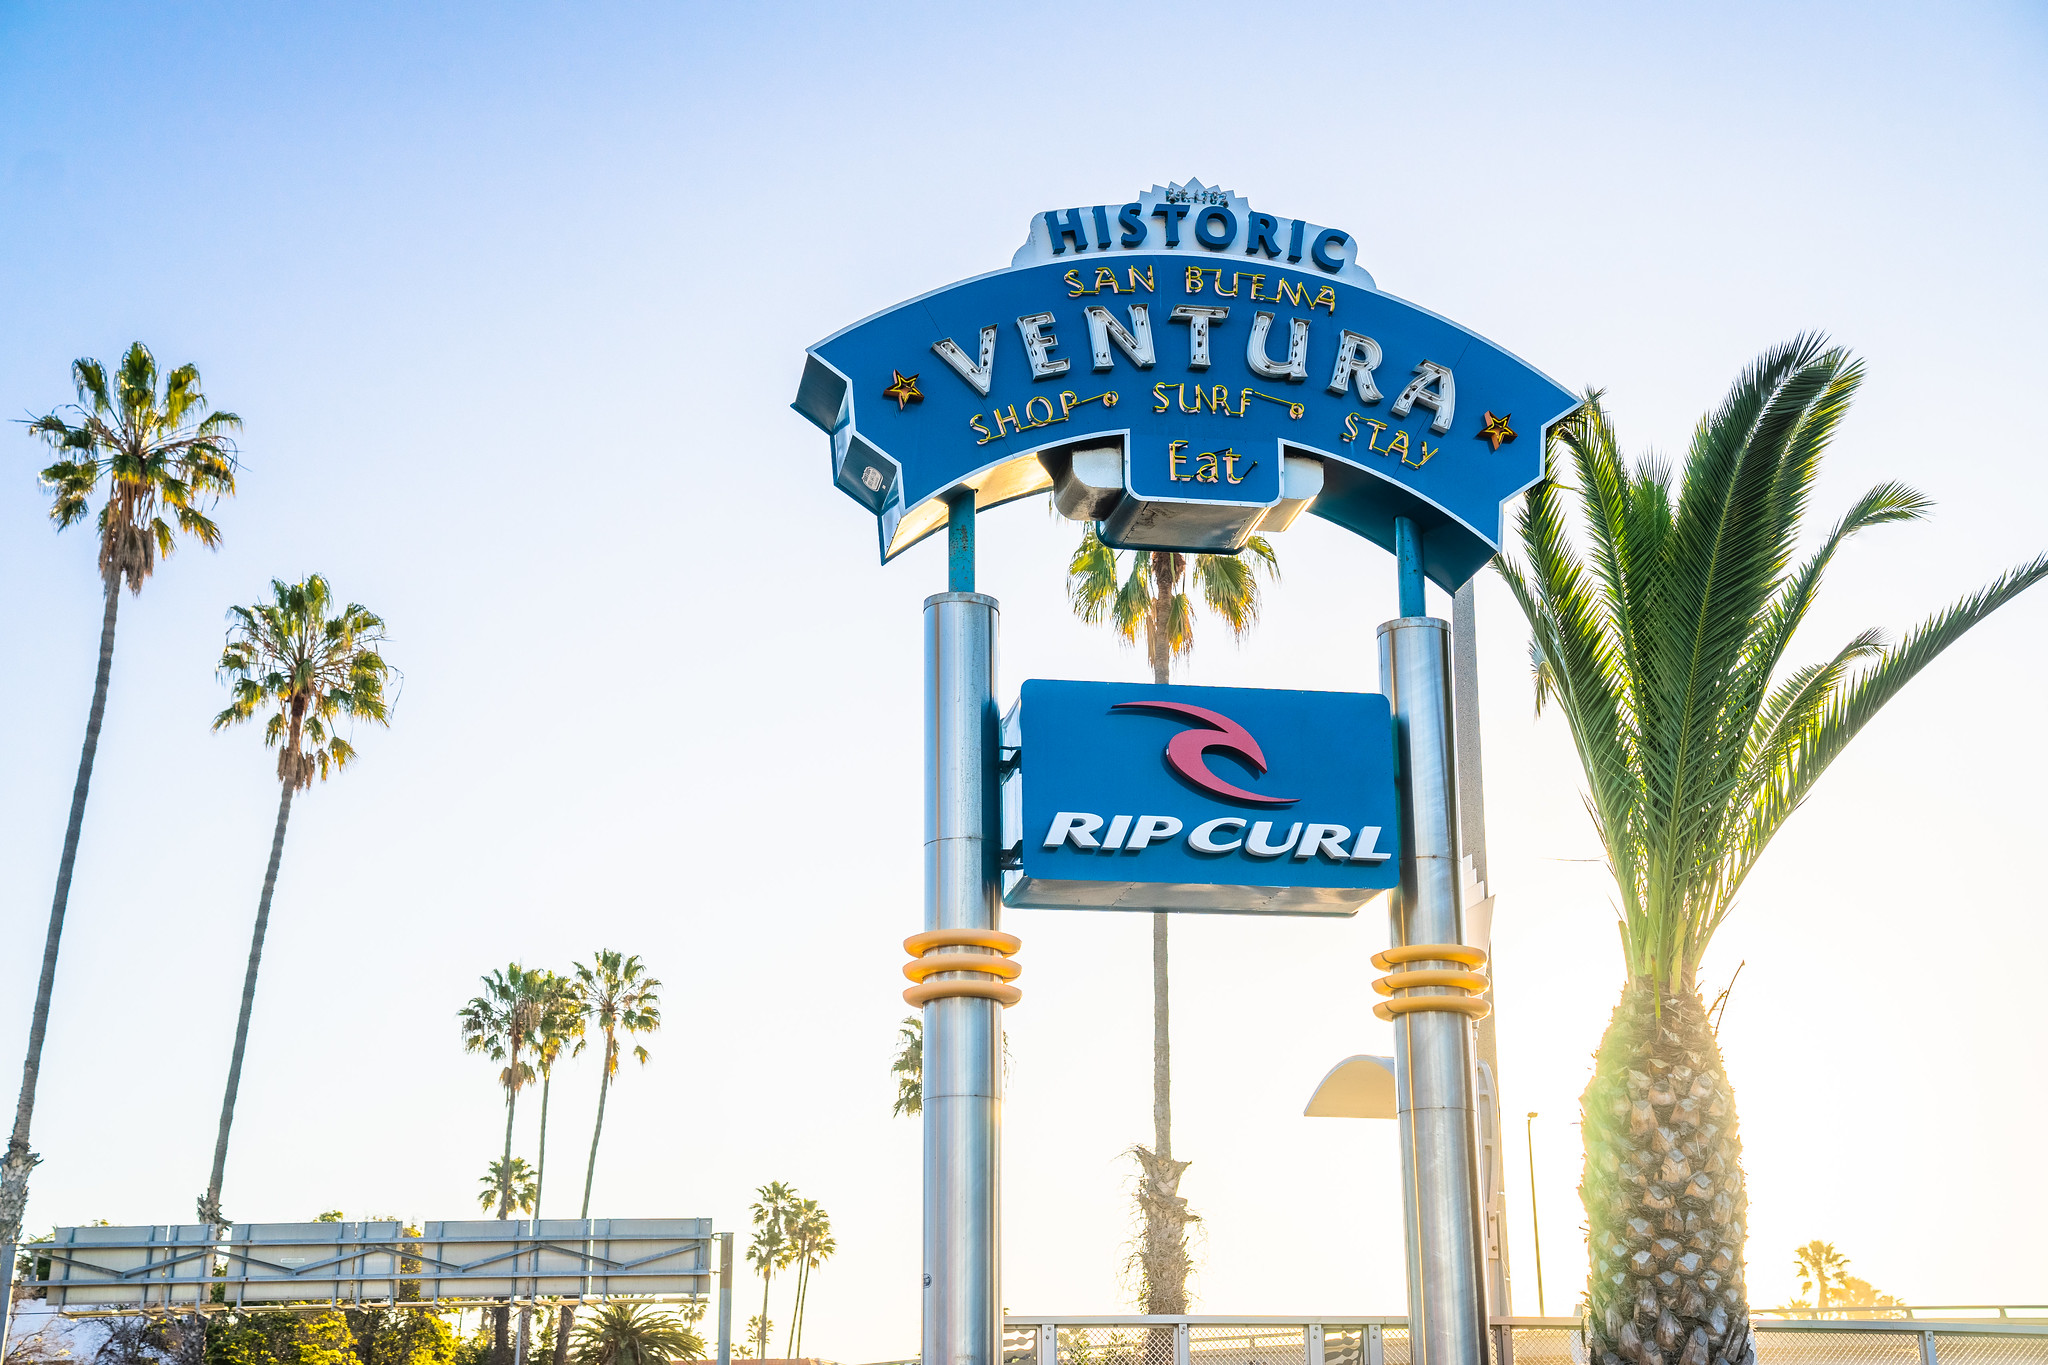 What can I do in Ventura on the Fourth of July?